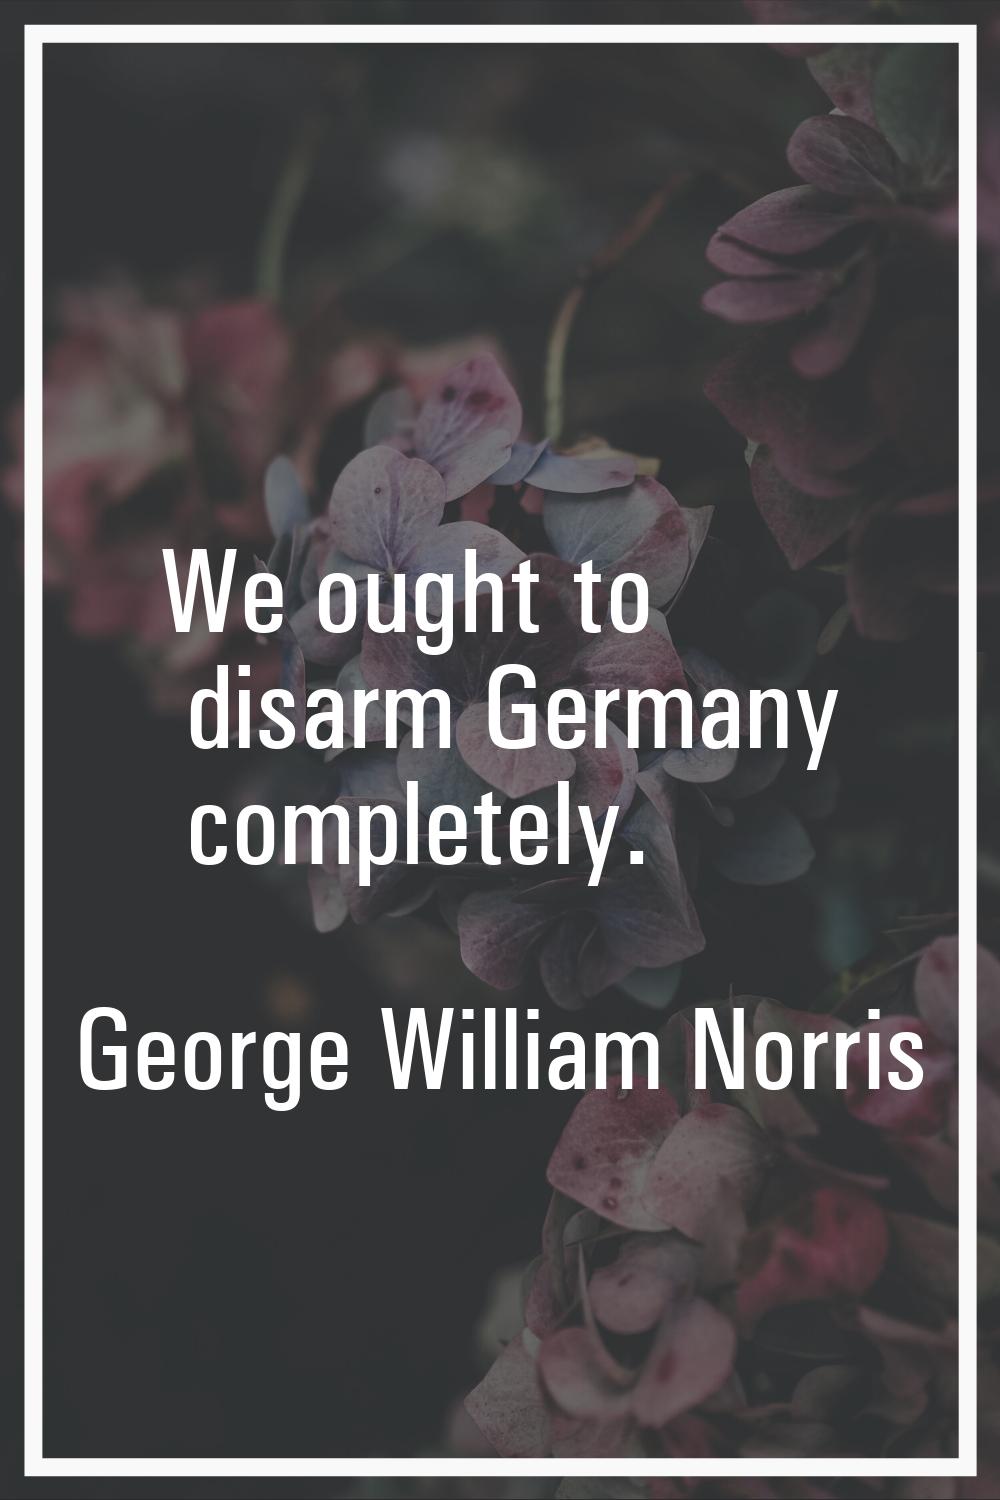 We ought to disarm Germany completely.